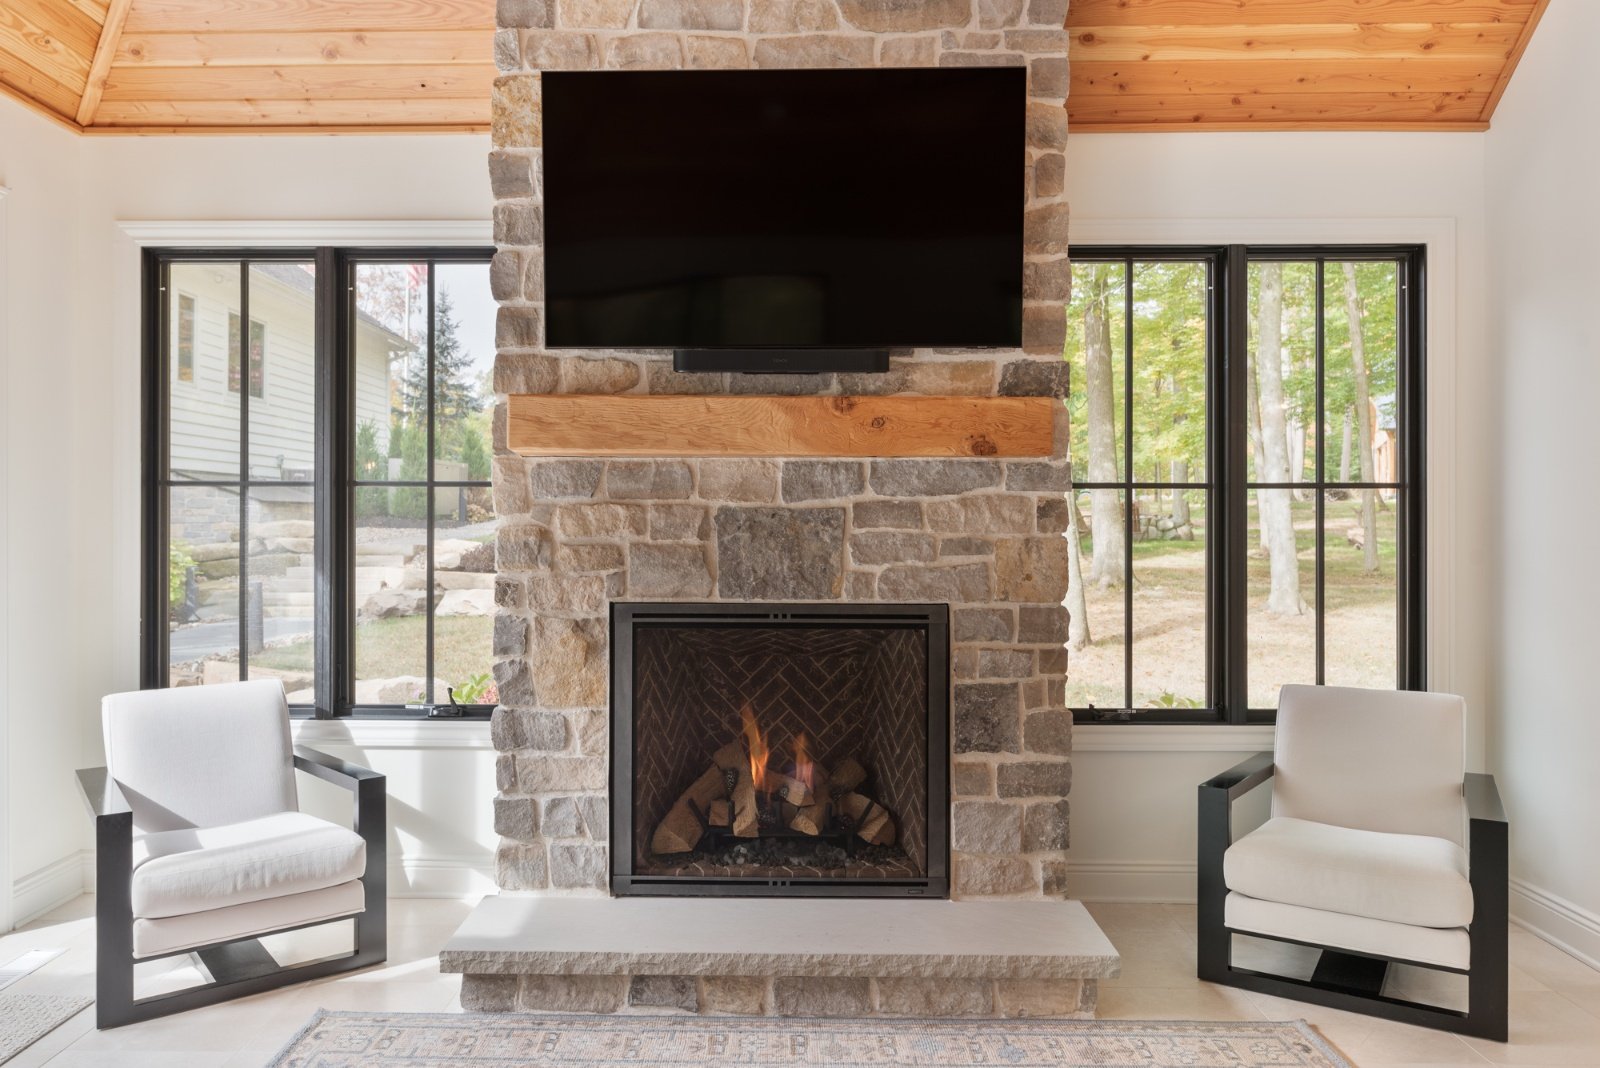 renovated pool house living room with stone fireplace